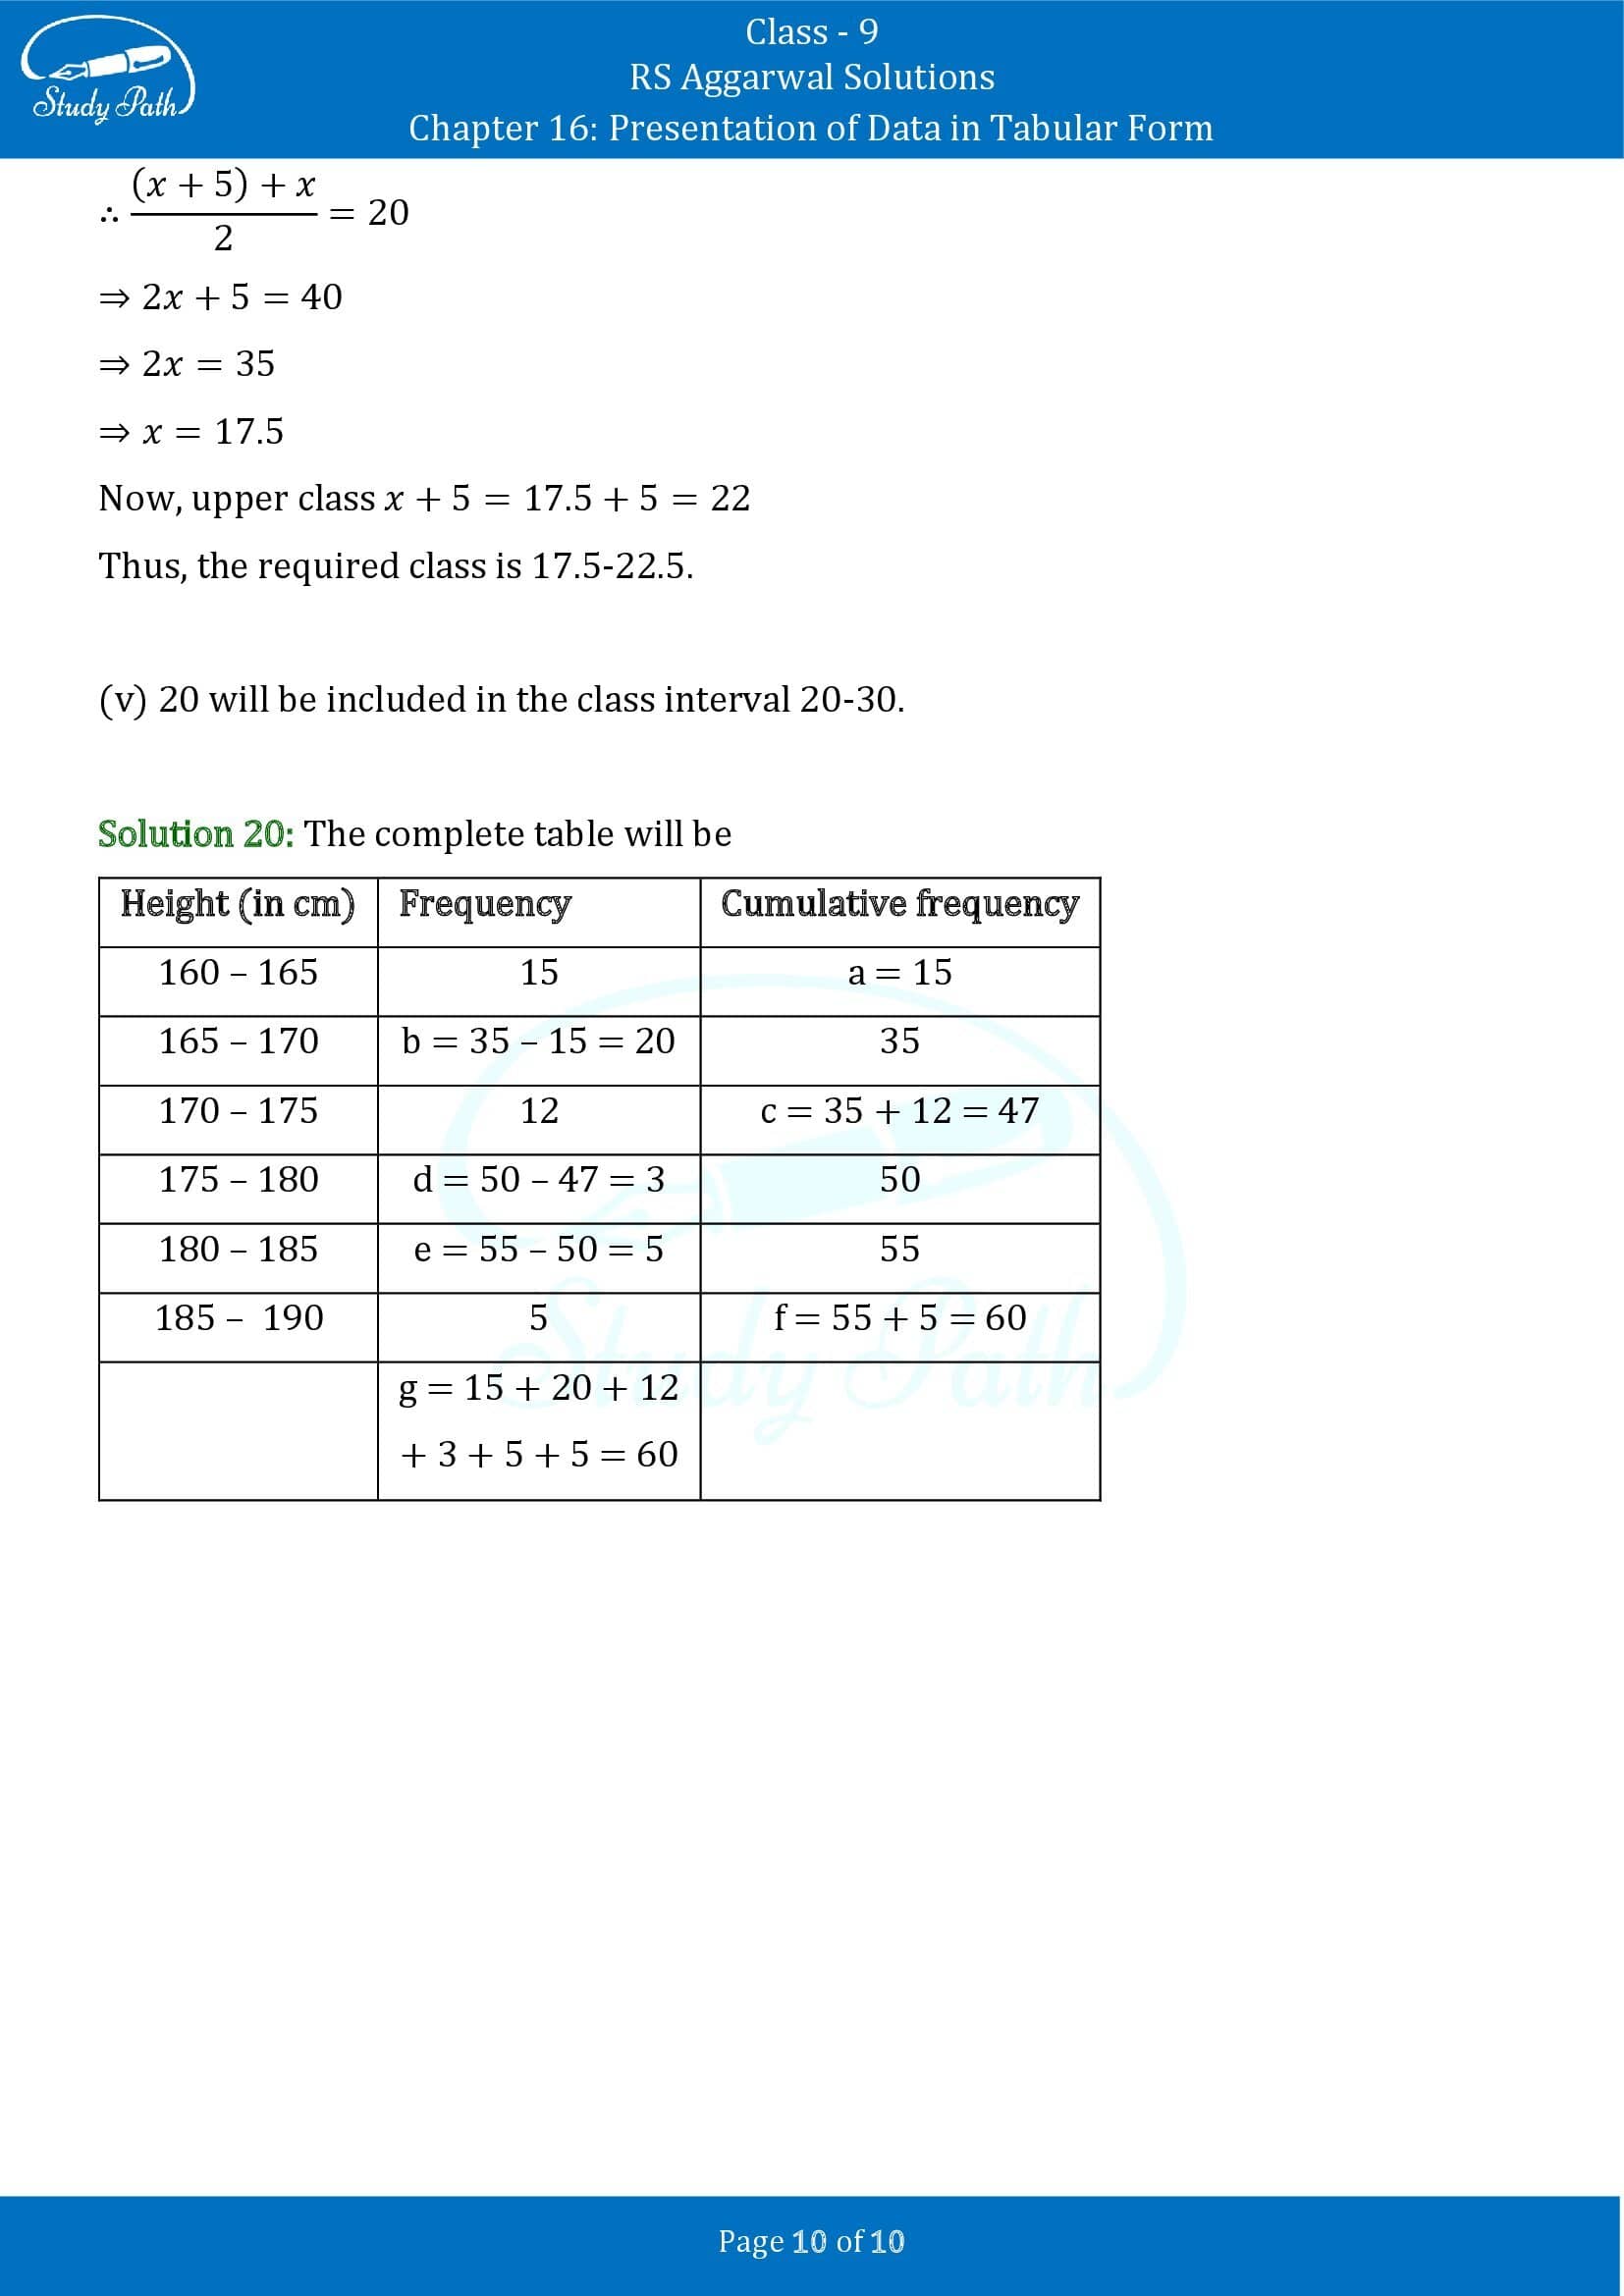 RS Aggarwal Solutions Class 9 Chapter 16 Presentation Of Data In Tabular Form Exercise 16 0010